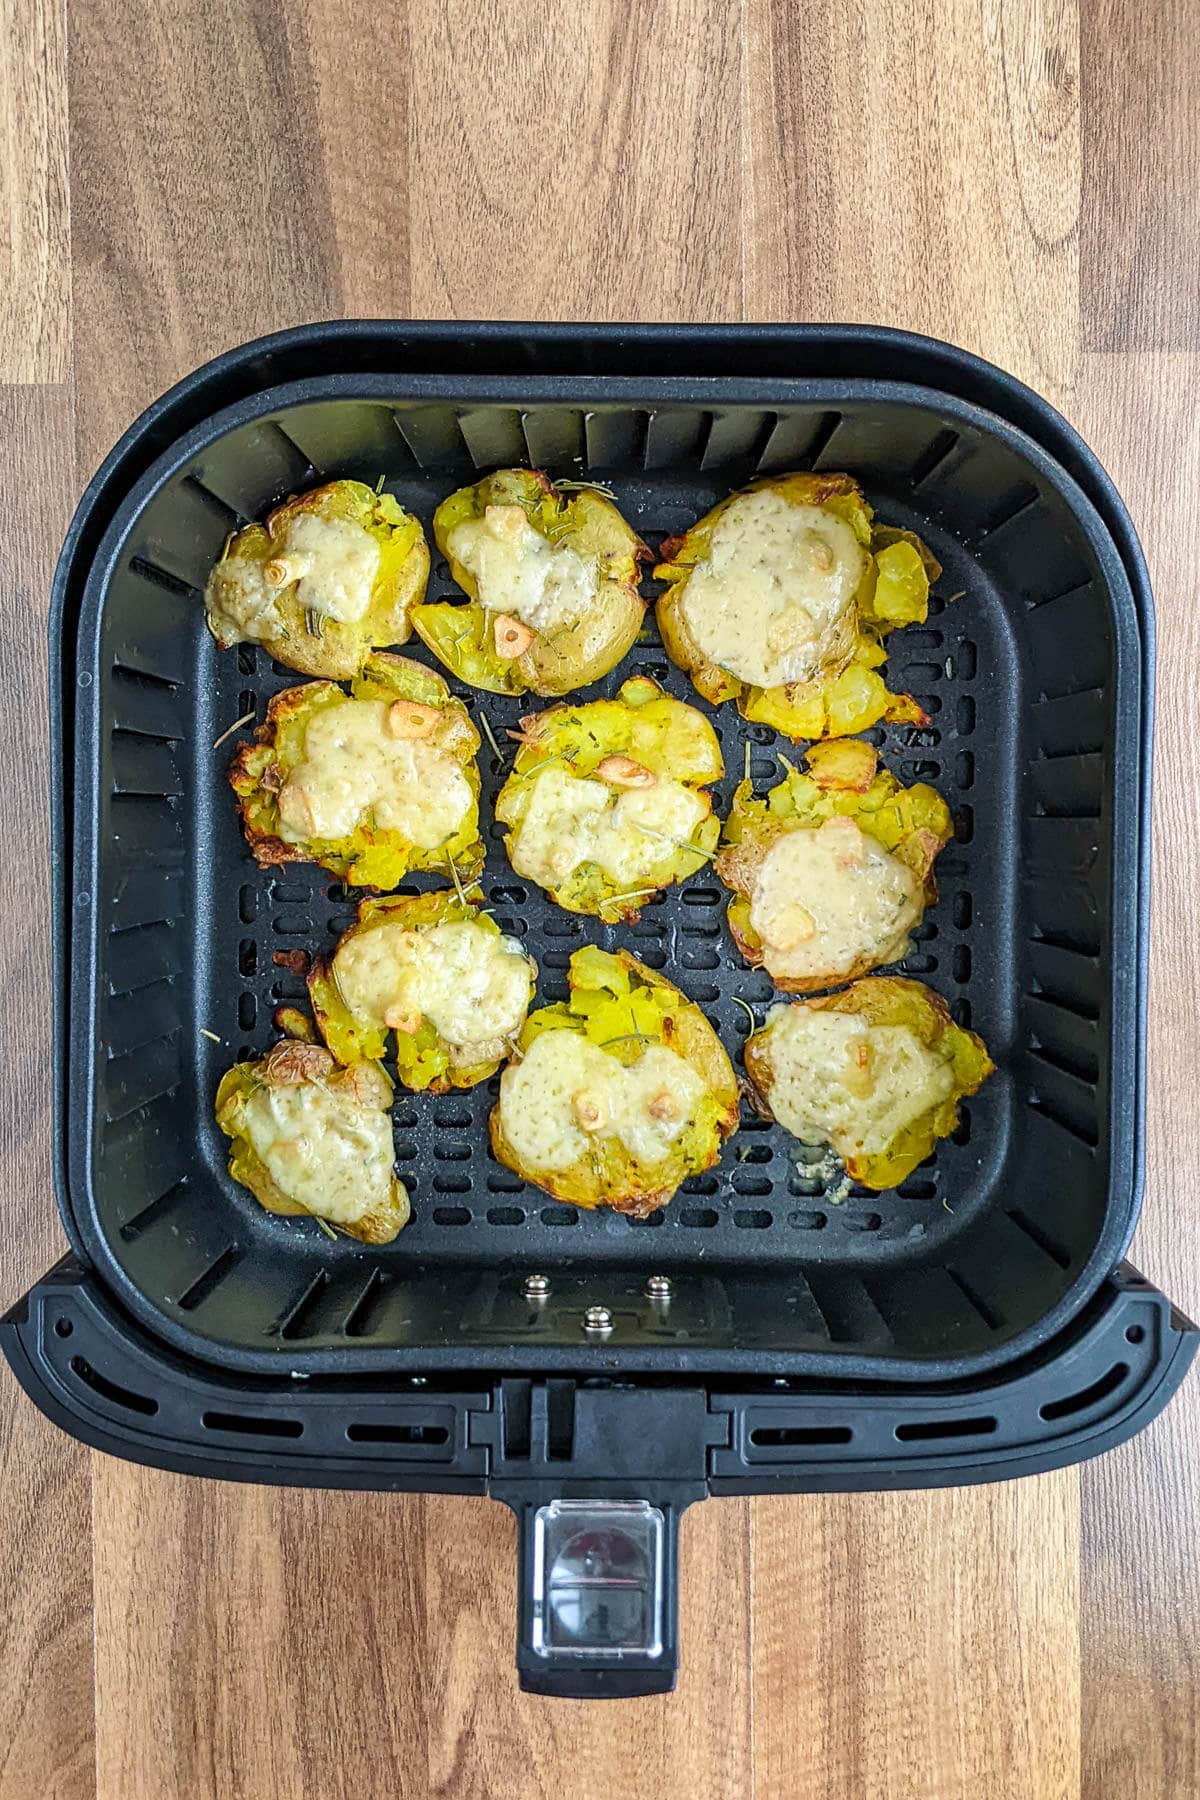 Top view of air fryer basket with roasted smashed potatoes with cheese, garlic and rosemary.